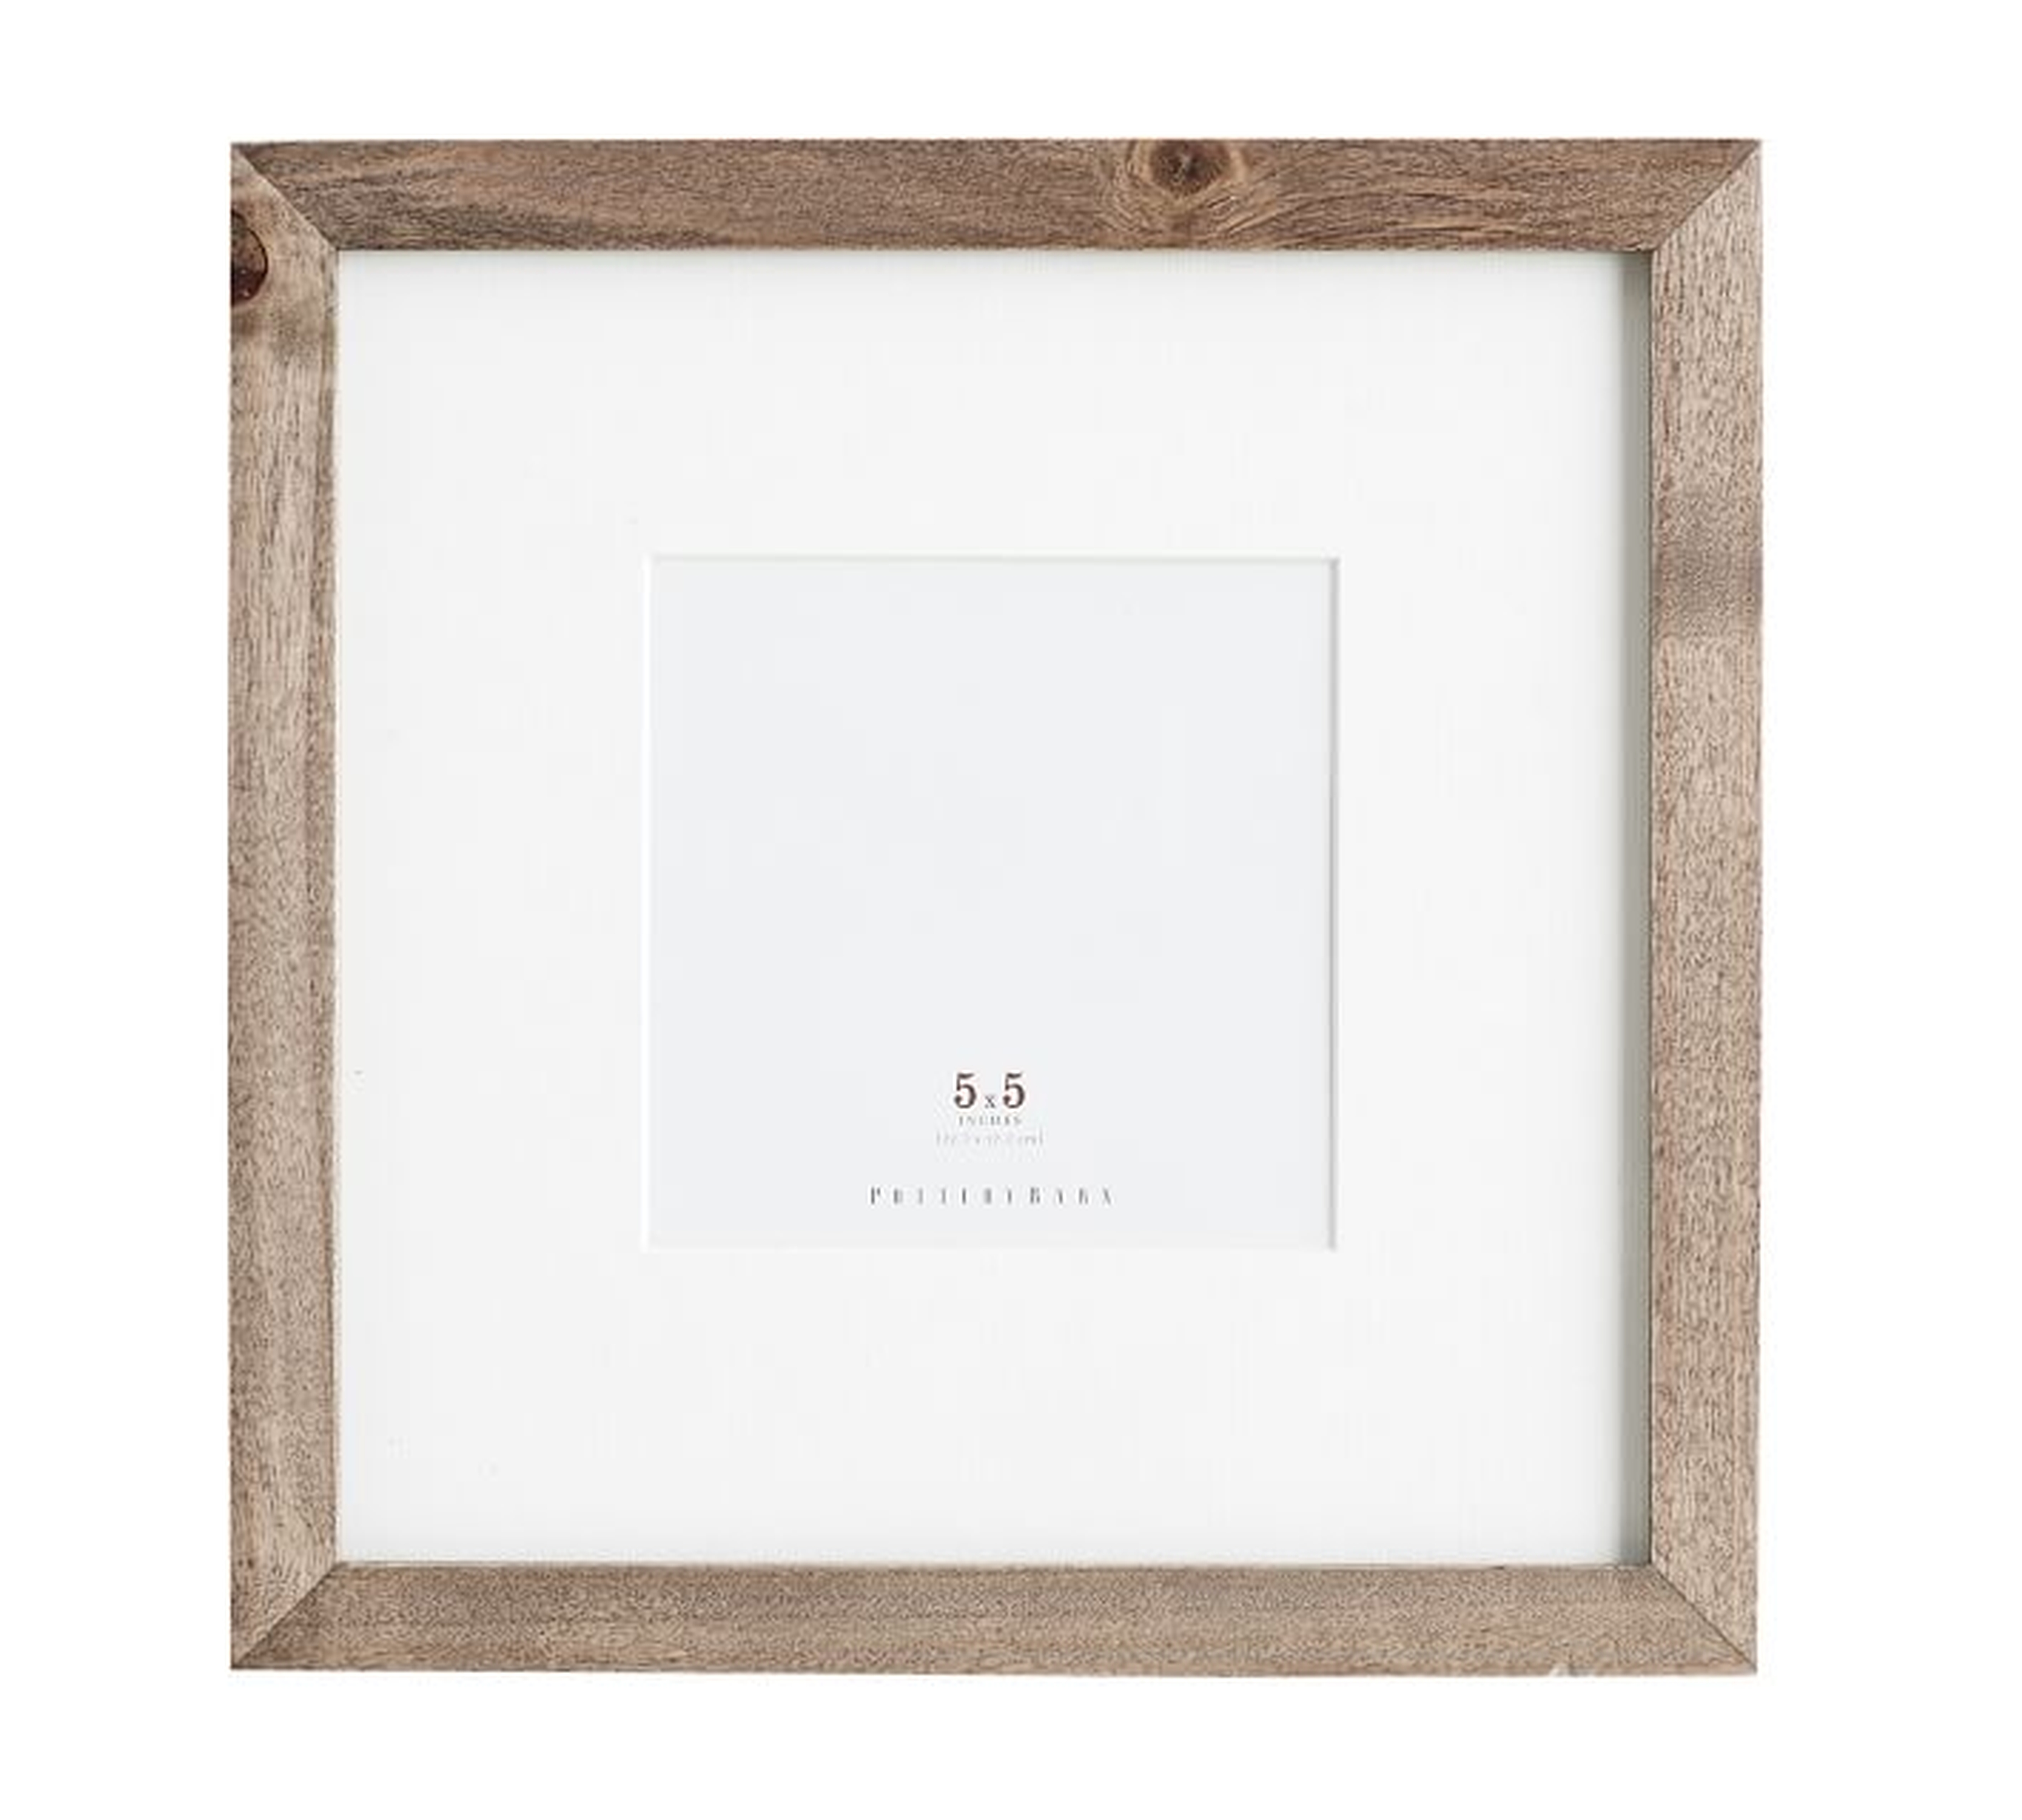 Wood Gallery Single Opening Frame, 5 x 5 - Gray - Pottery Barn